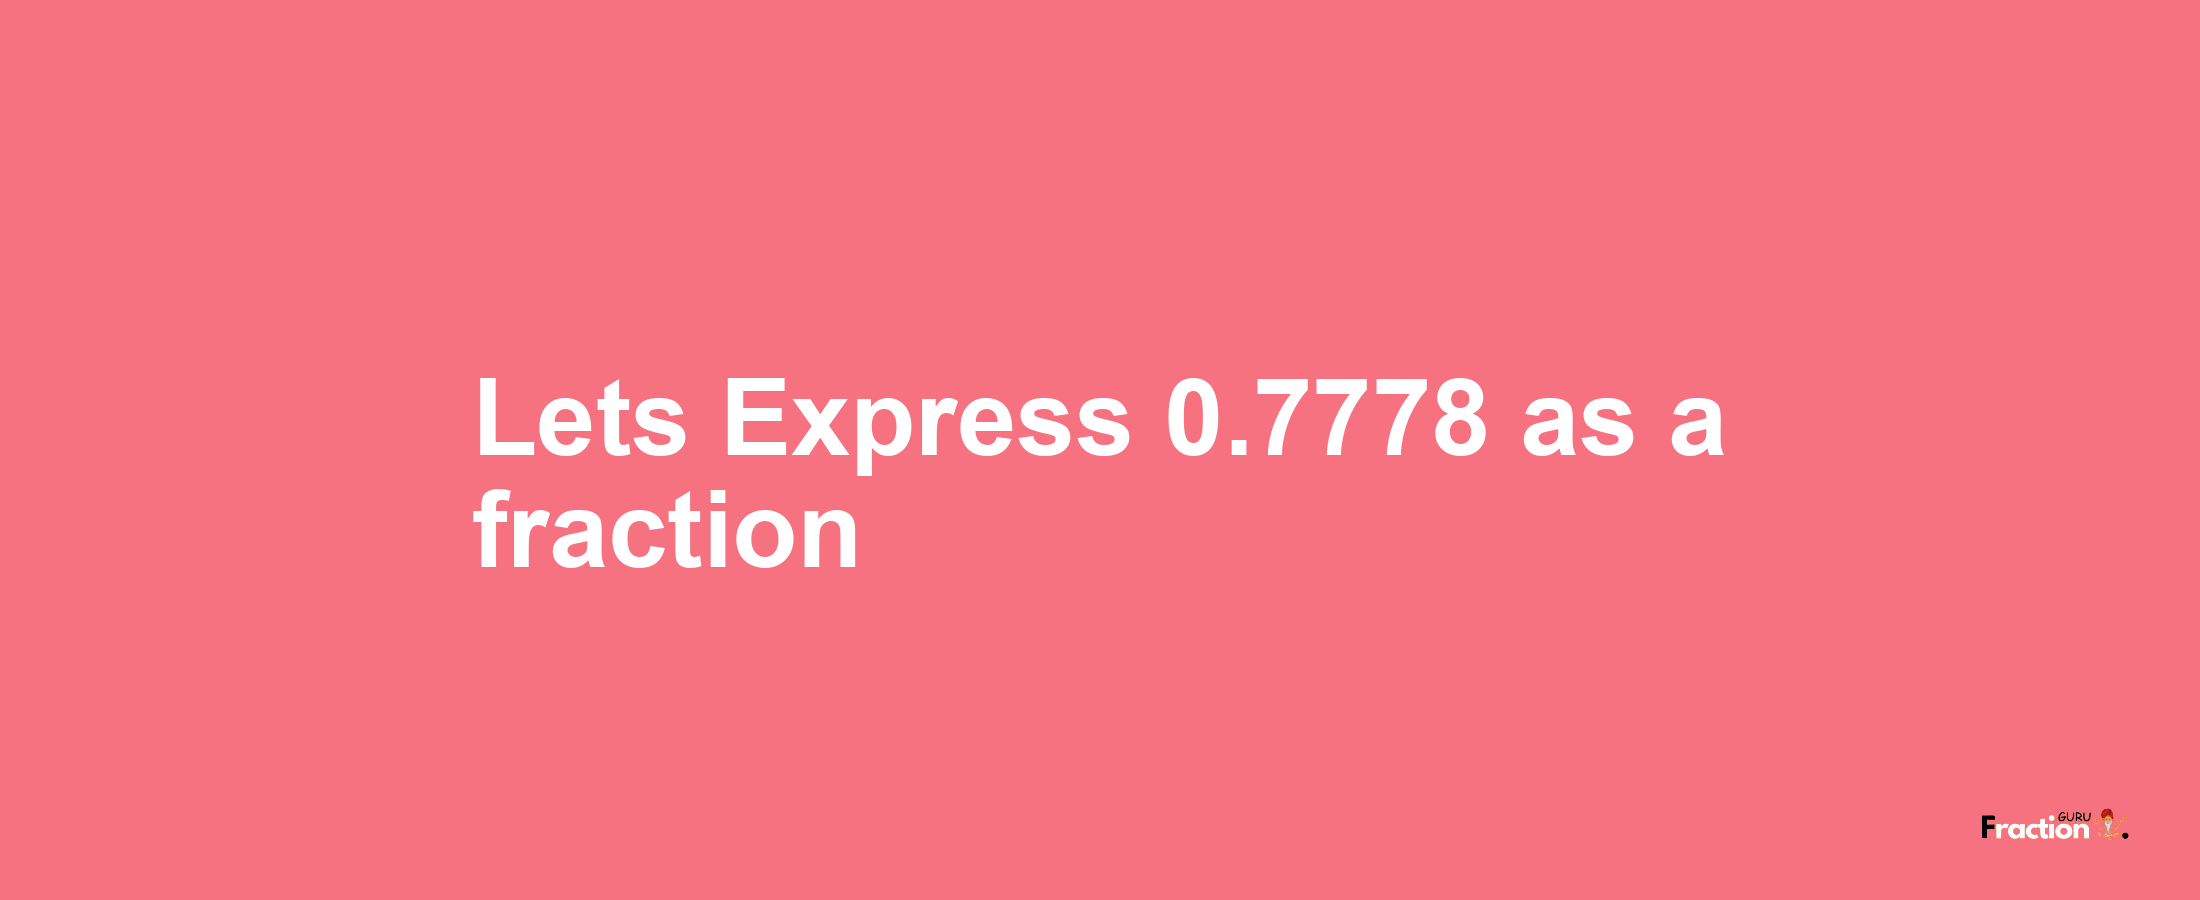 Lets Express 0.7778 as afraction